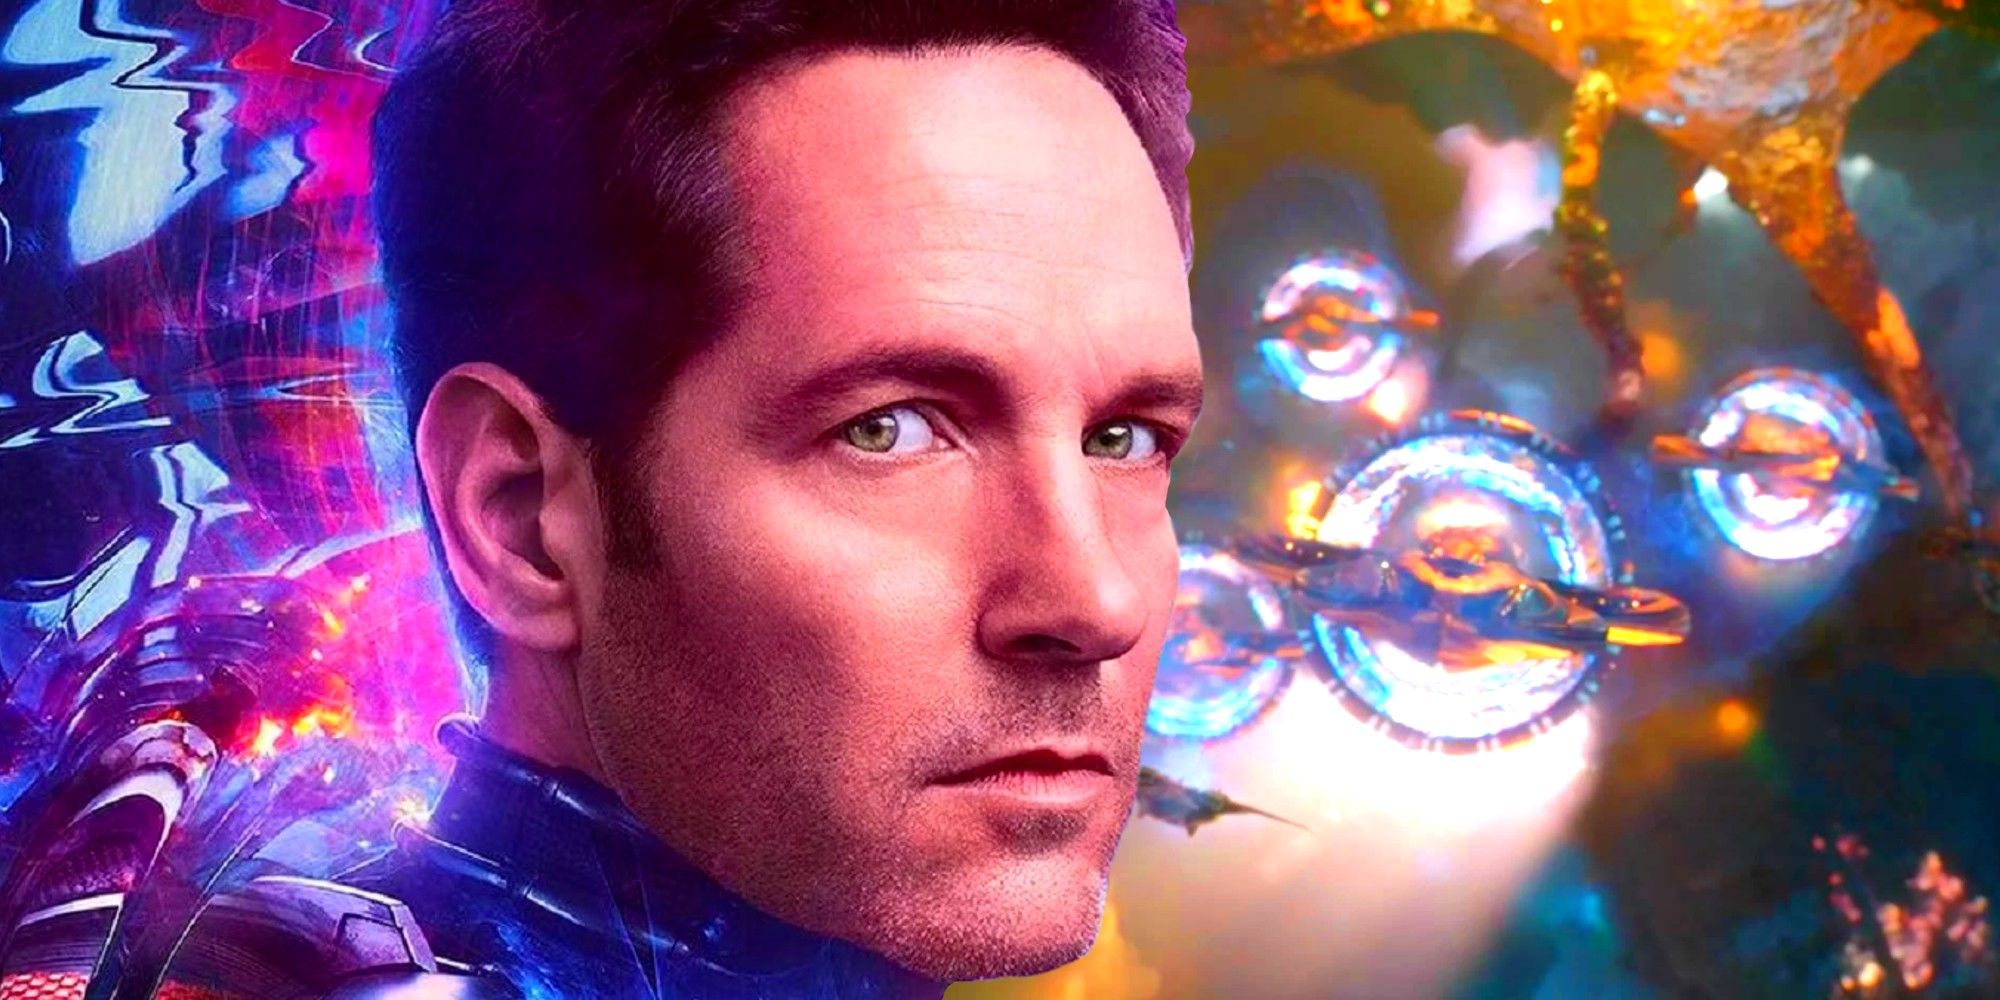 Why Marvel's Ant-Man and The Wasp Calls the Microsverse the Quantum Realm